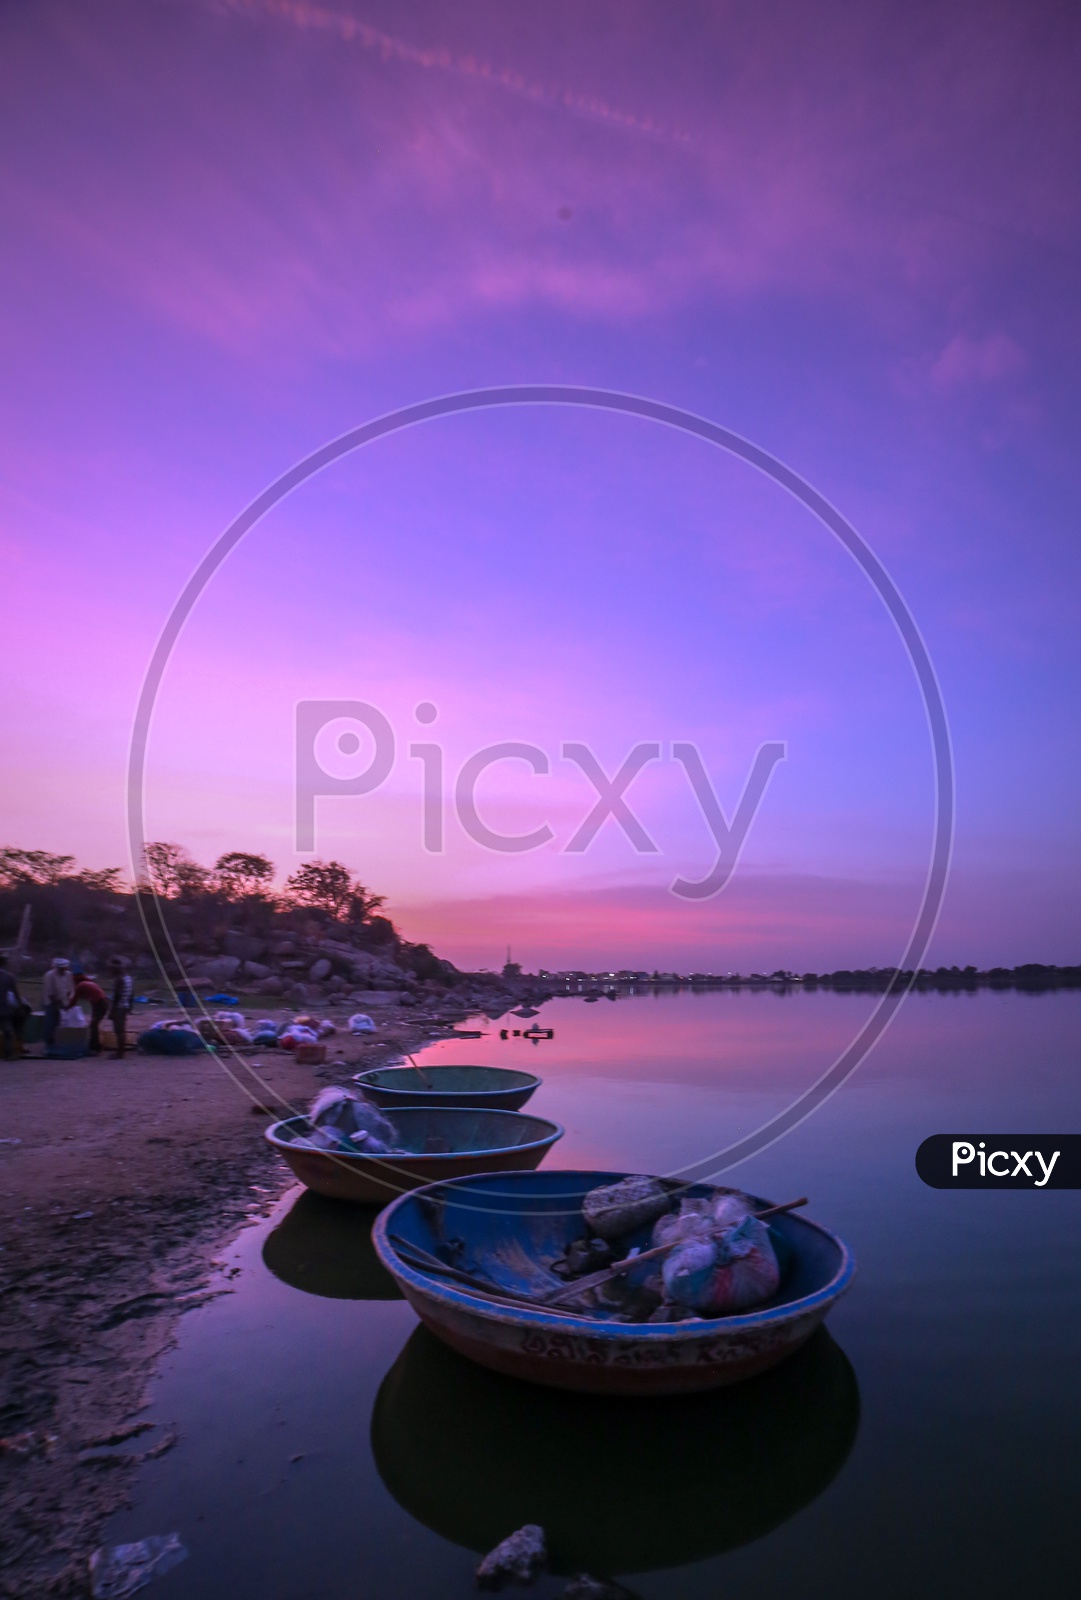 Fishing Coracle Boats At a Lake With Blue hour Sky In Background